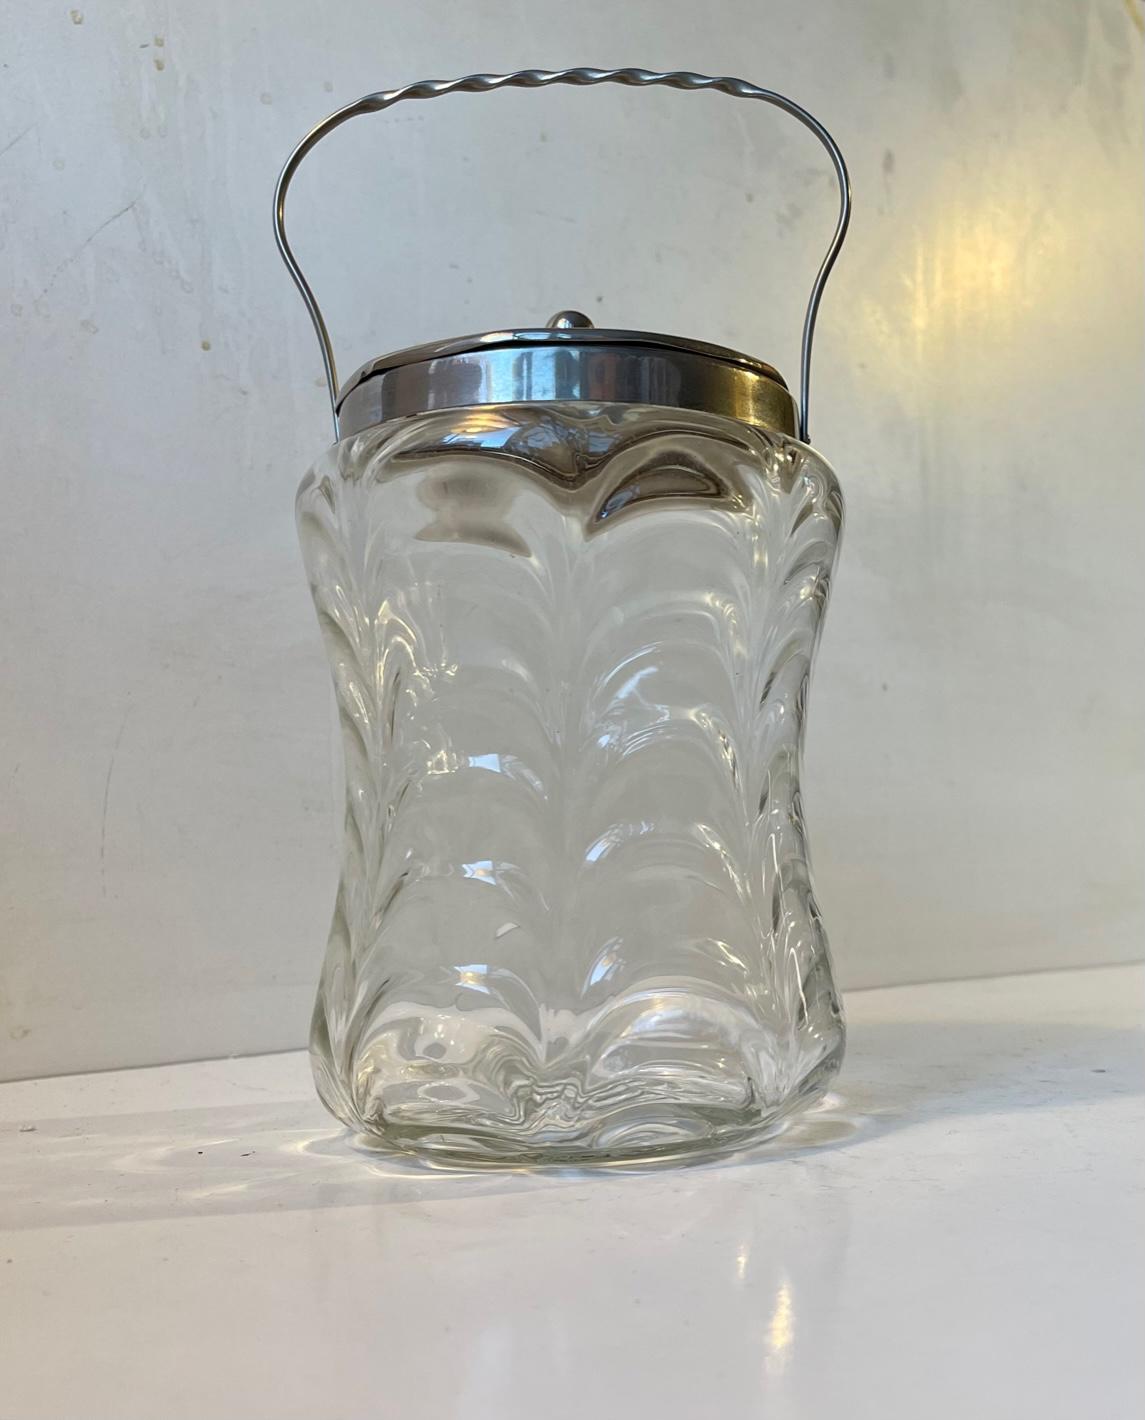 A mouth-blown biscuit jar in clear optical wavy glass. It features its original pewter lid and twisted handle. It was made circa 1900-1910 by Holmegaard in Denmark. Use it for its purpose or to store tea, coffee or rice etc. Measurements: height: